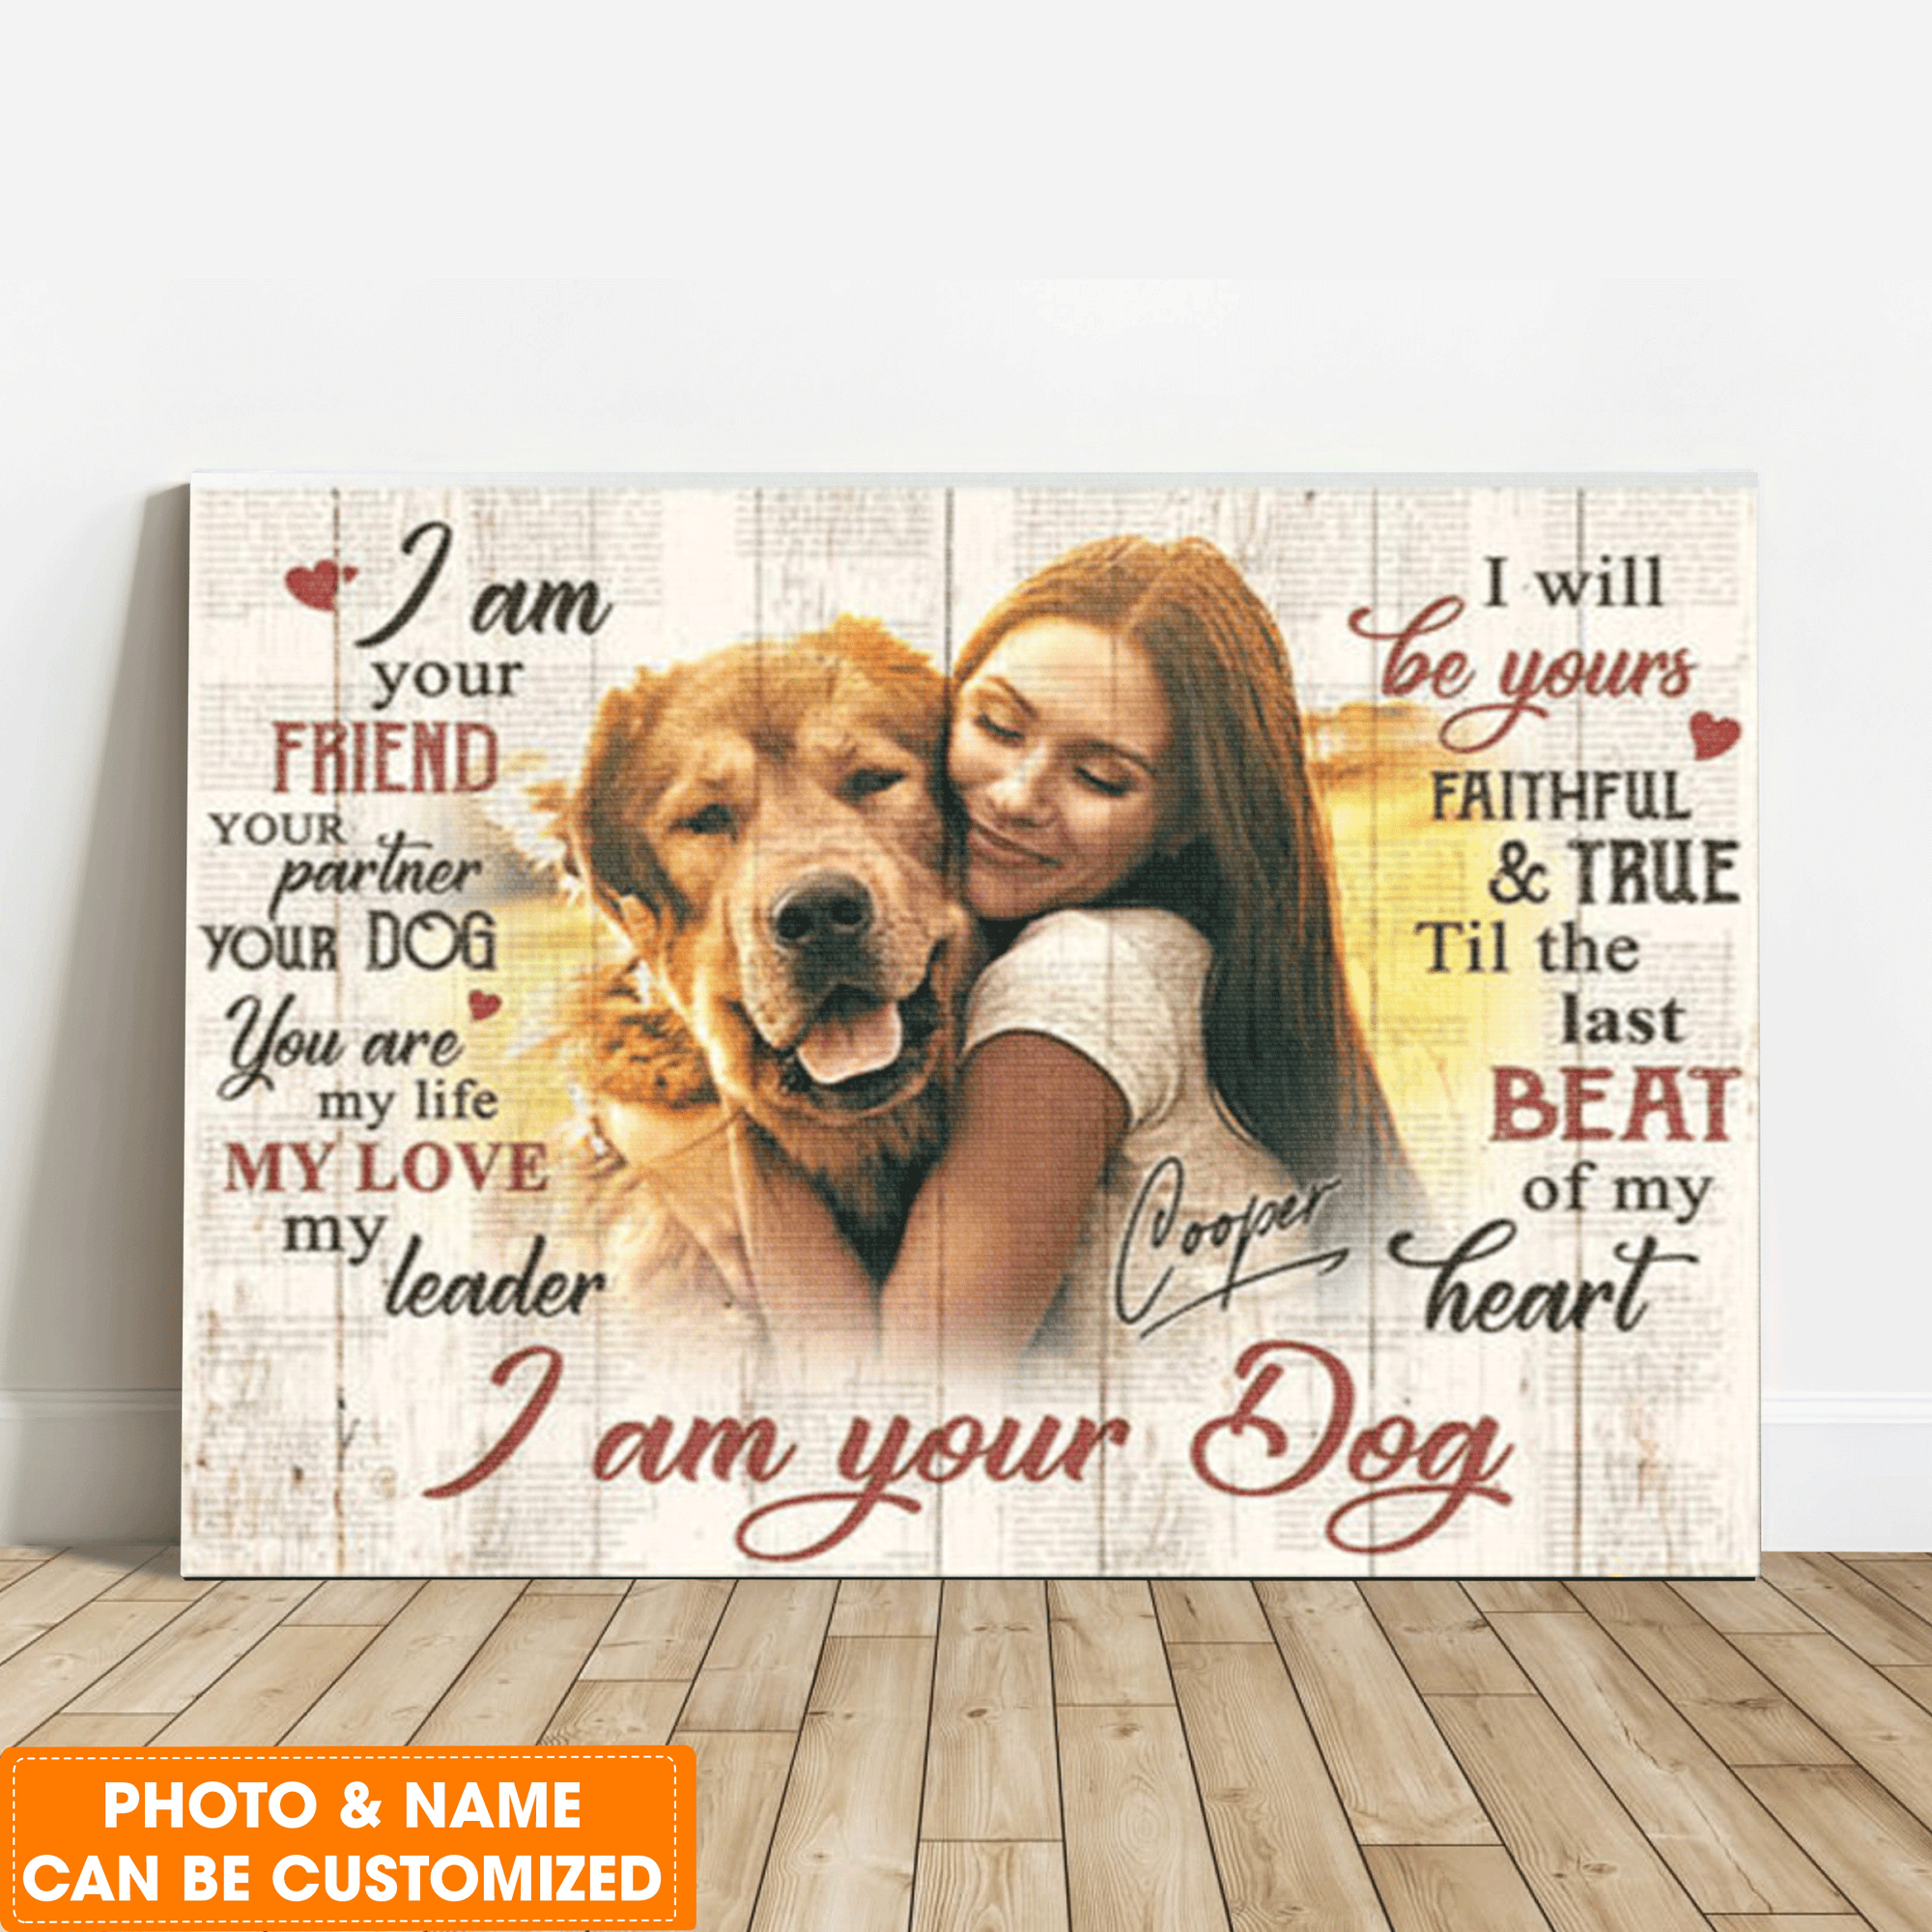 Personalized Dog Landscape Canvas, Custom Pet Photo And Pet Name, I Am Your Dog Canvas, Perfect Gift For Dog Lovers, Friend, Family